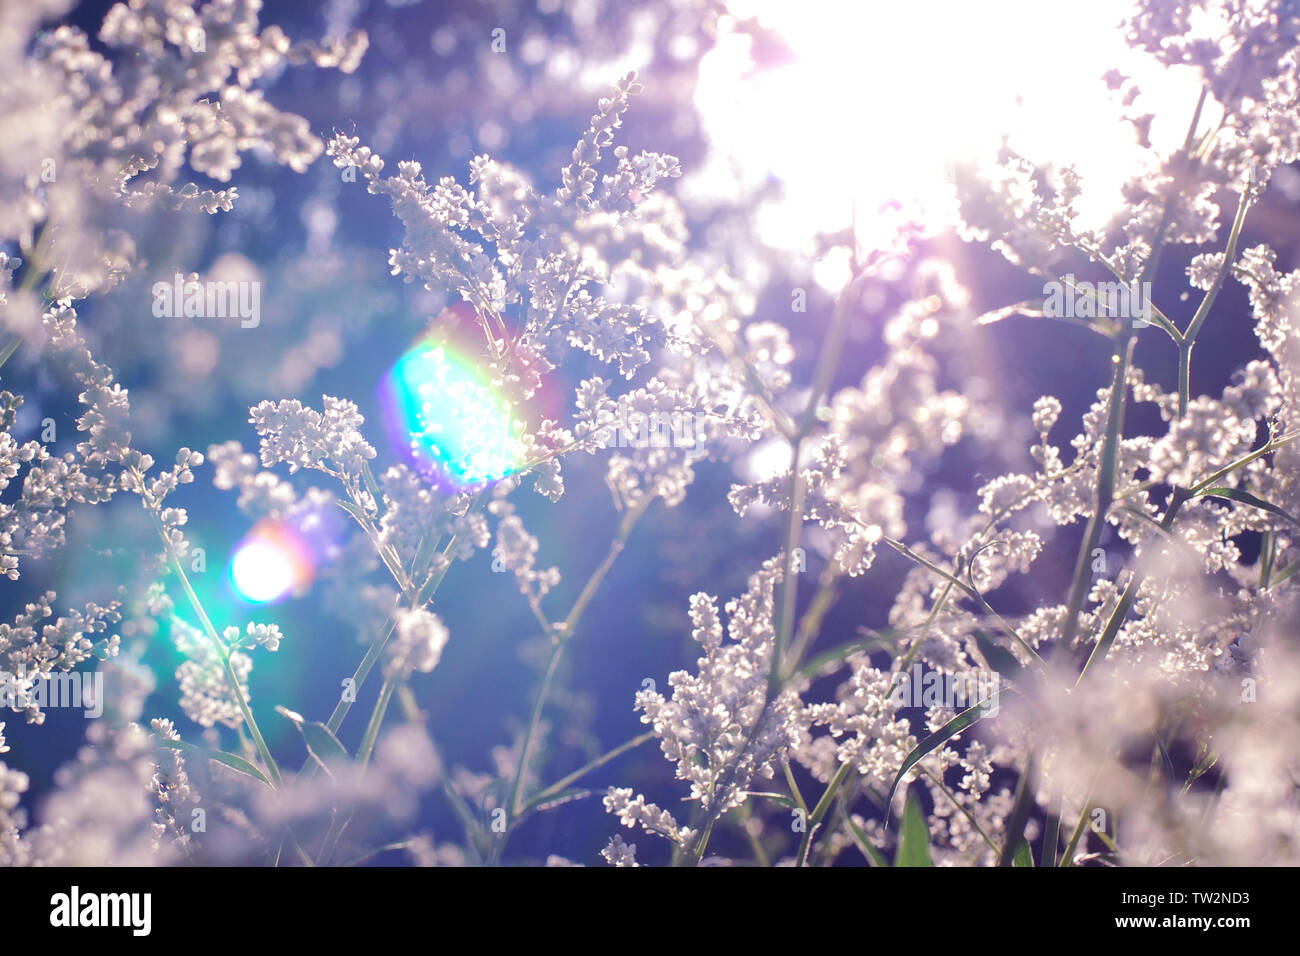 Sunbeams in graceful field grass and plants at sunset, blurred defocused background Stock Photo